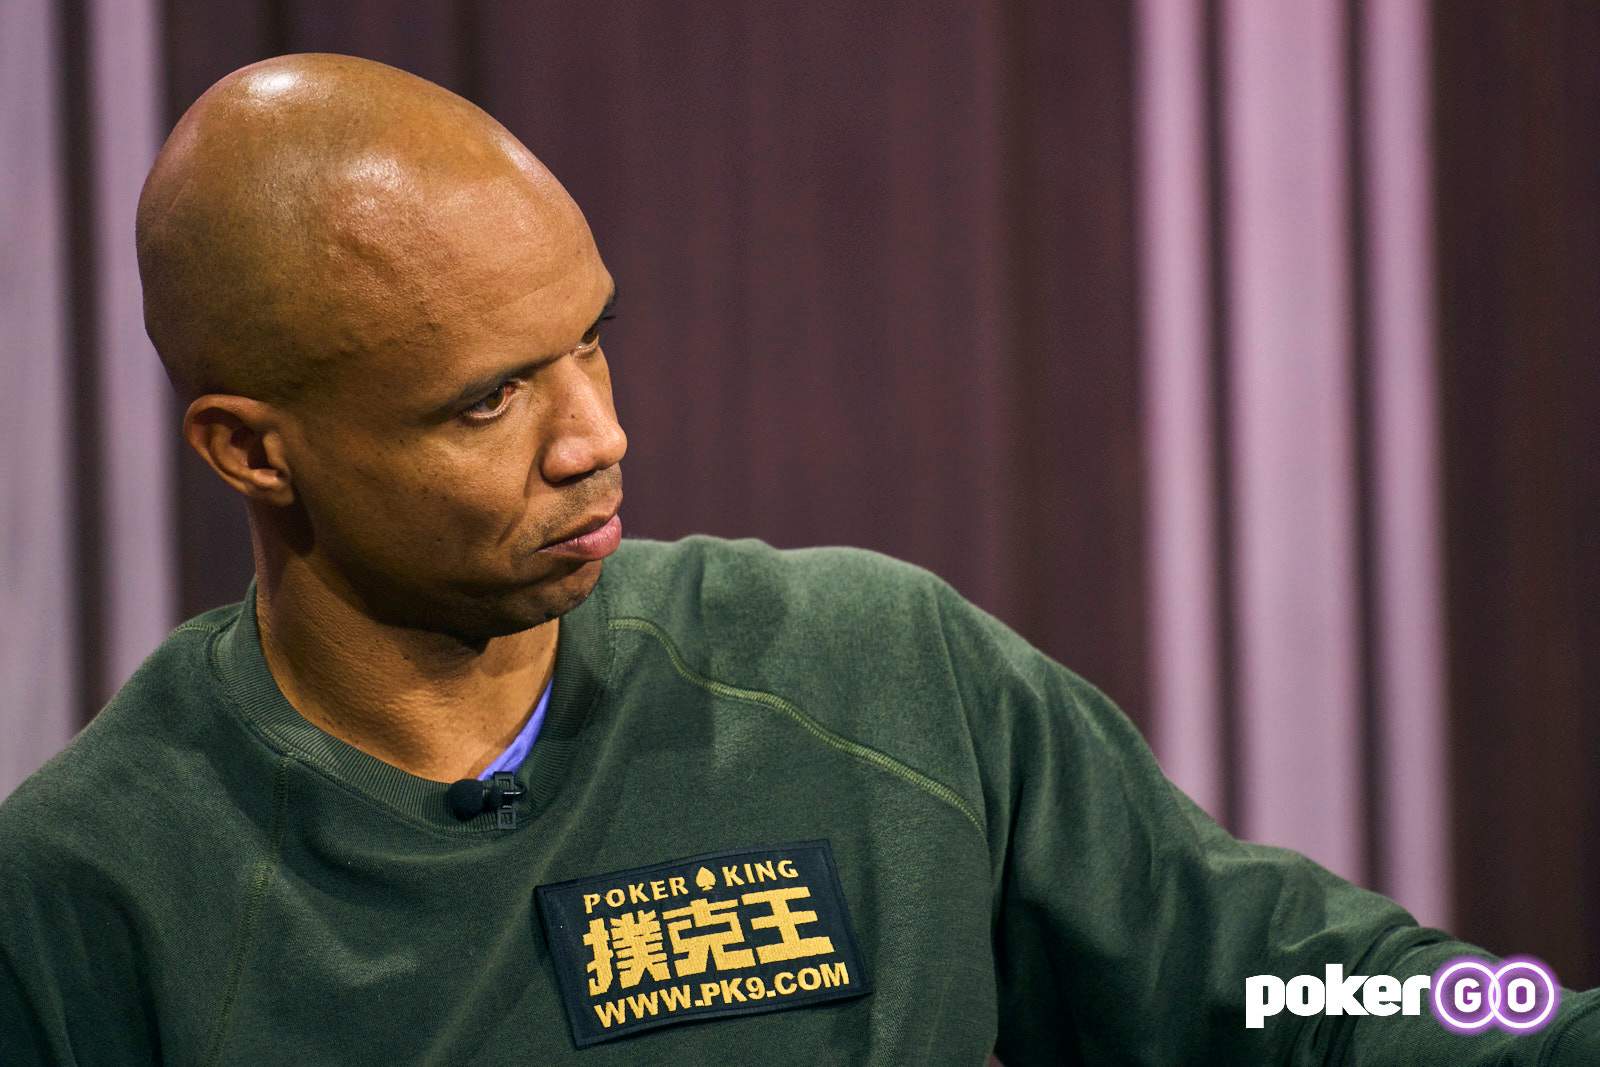 Phil Ivey "More Appreciative" In High Stakes Poker Return